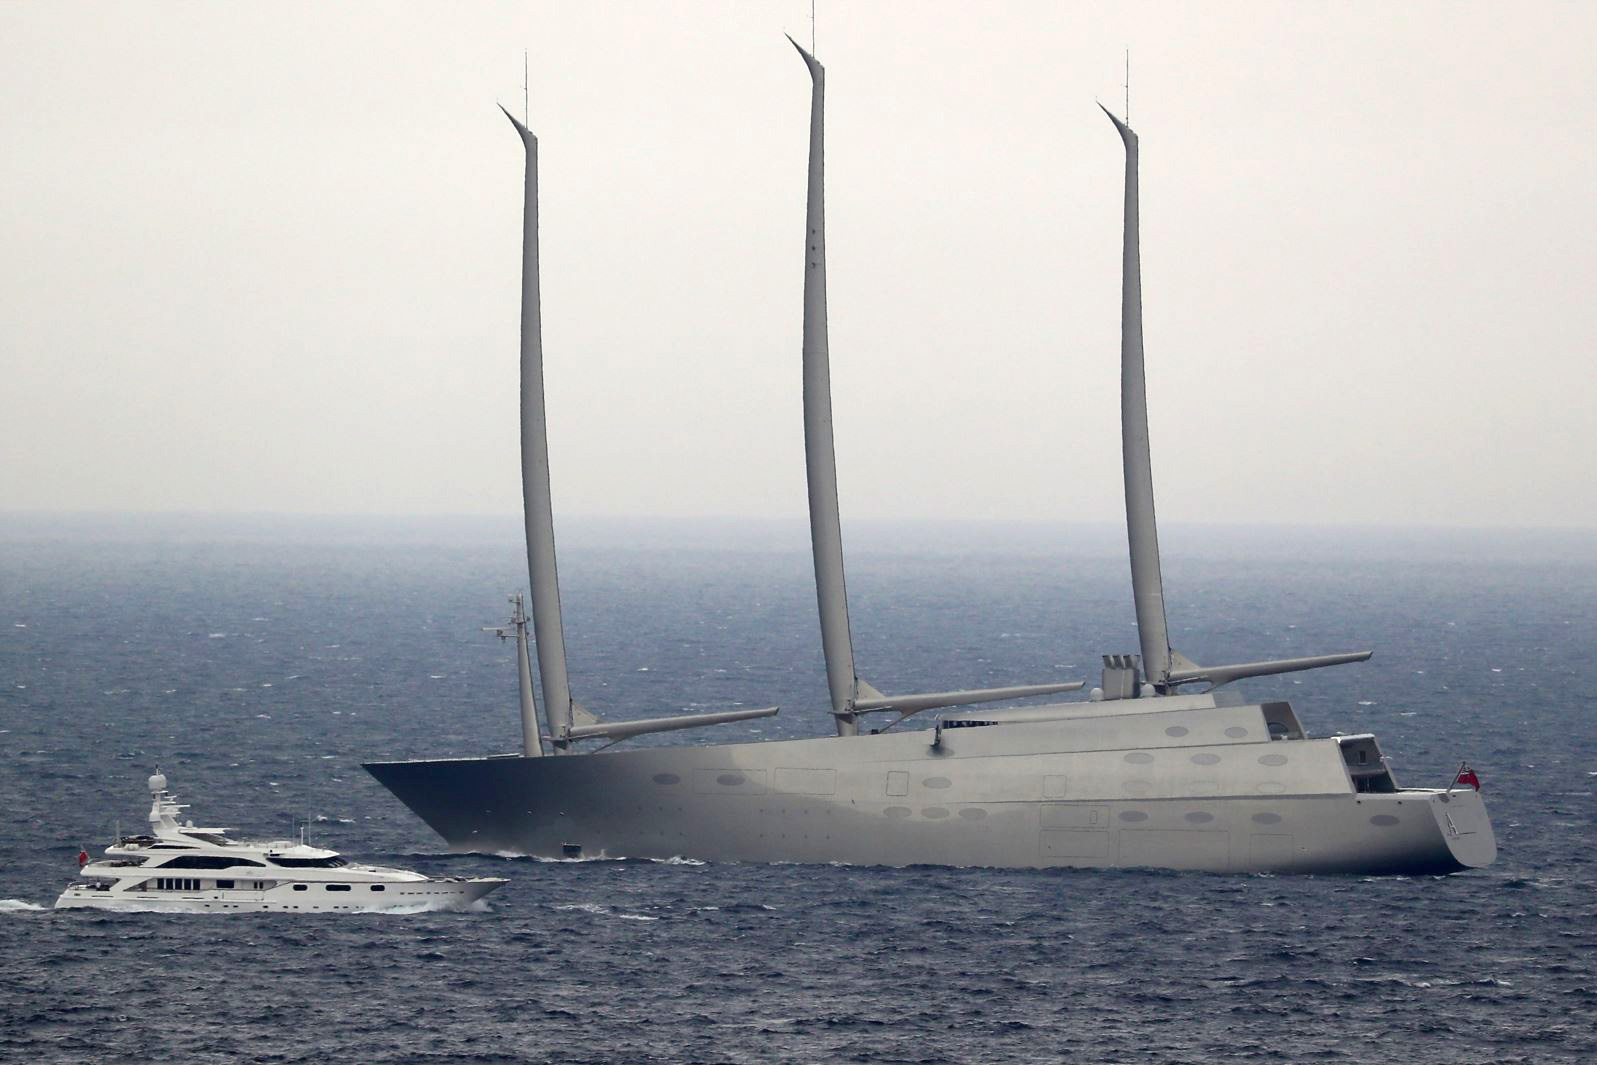 470 million dollar Sailing Yacht A, owned by Russian tycoon Andrey Melnichenko (AP photo)